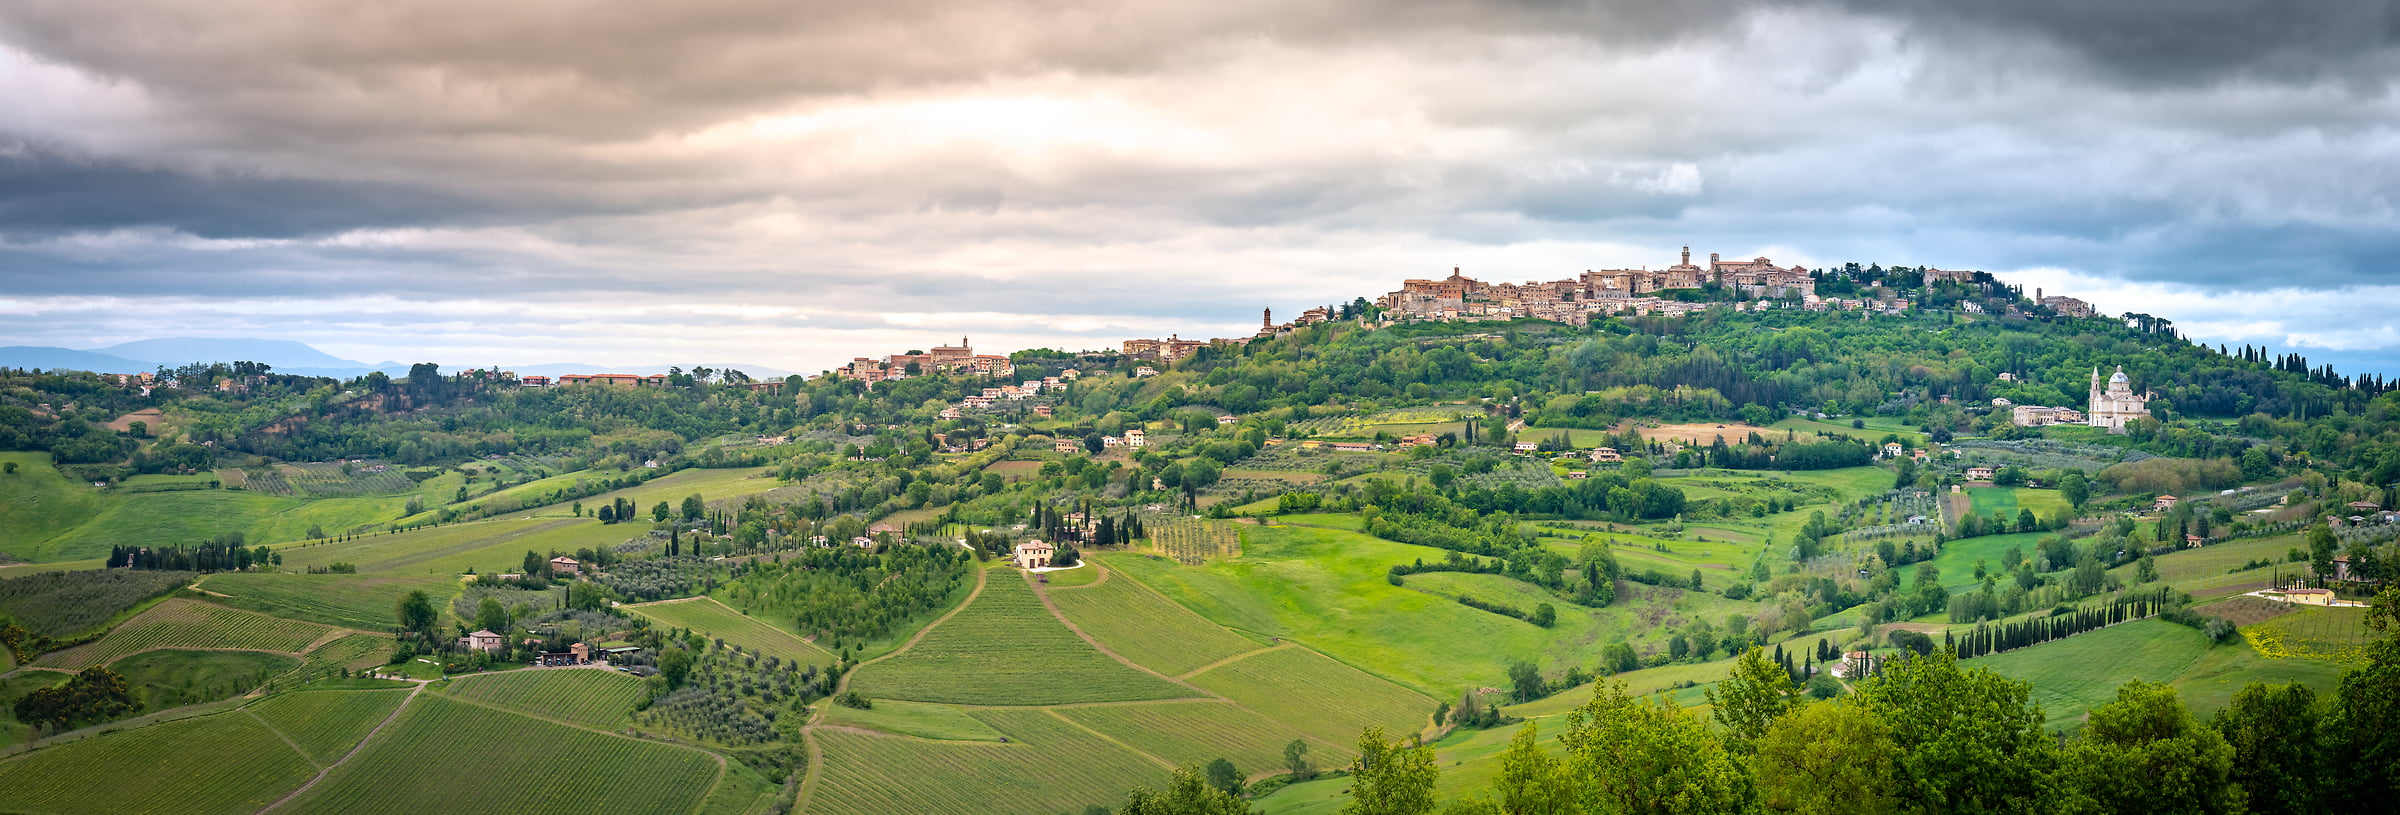 283 megapixels! A very high resolution, large-format VAST photo print of an Italian landscape; photograph created by Justin Katz in Montepulciano, Tuscany, Italy.